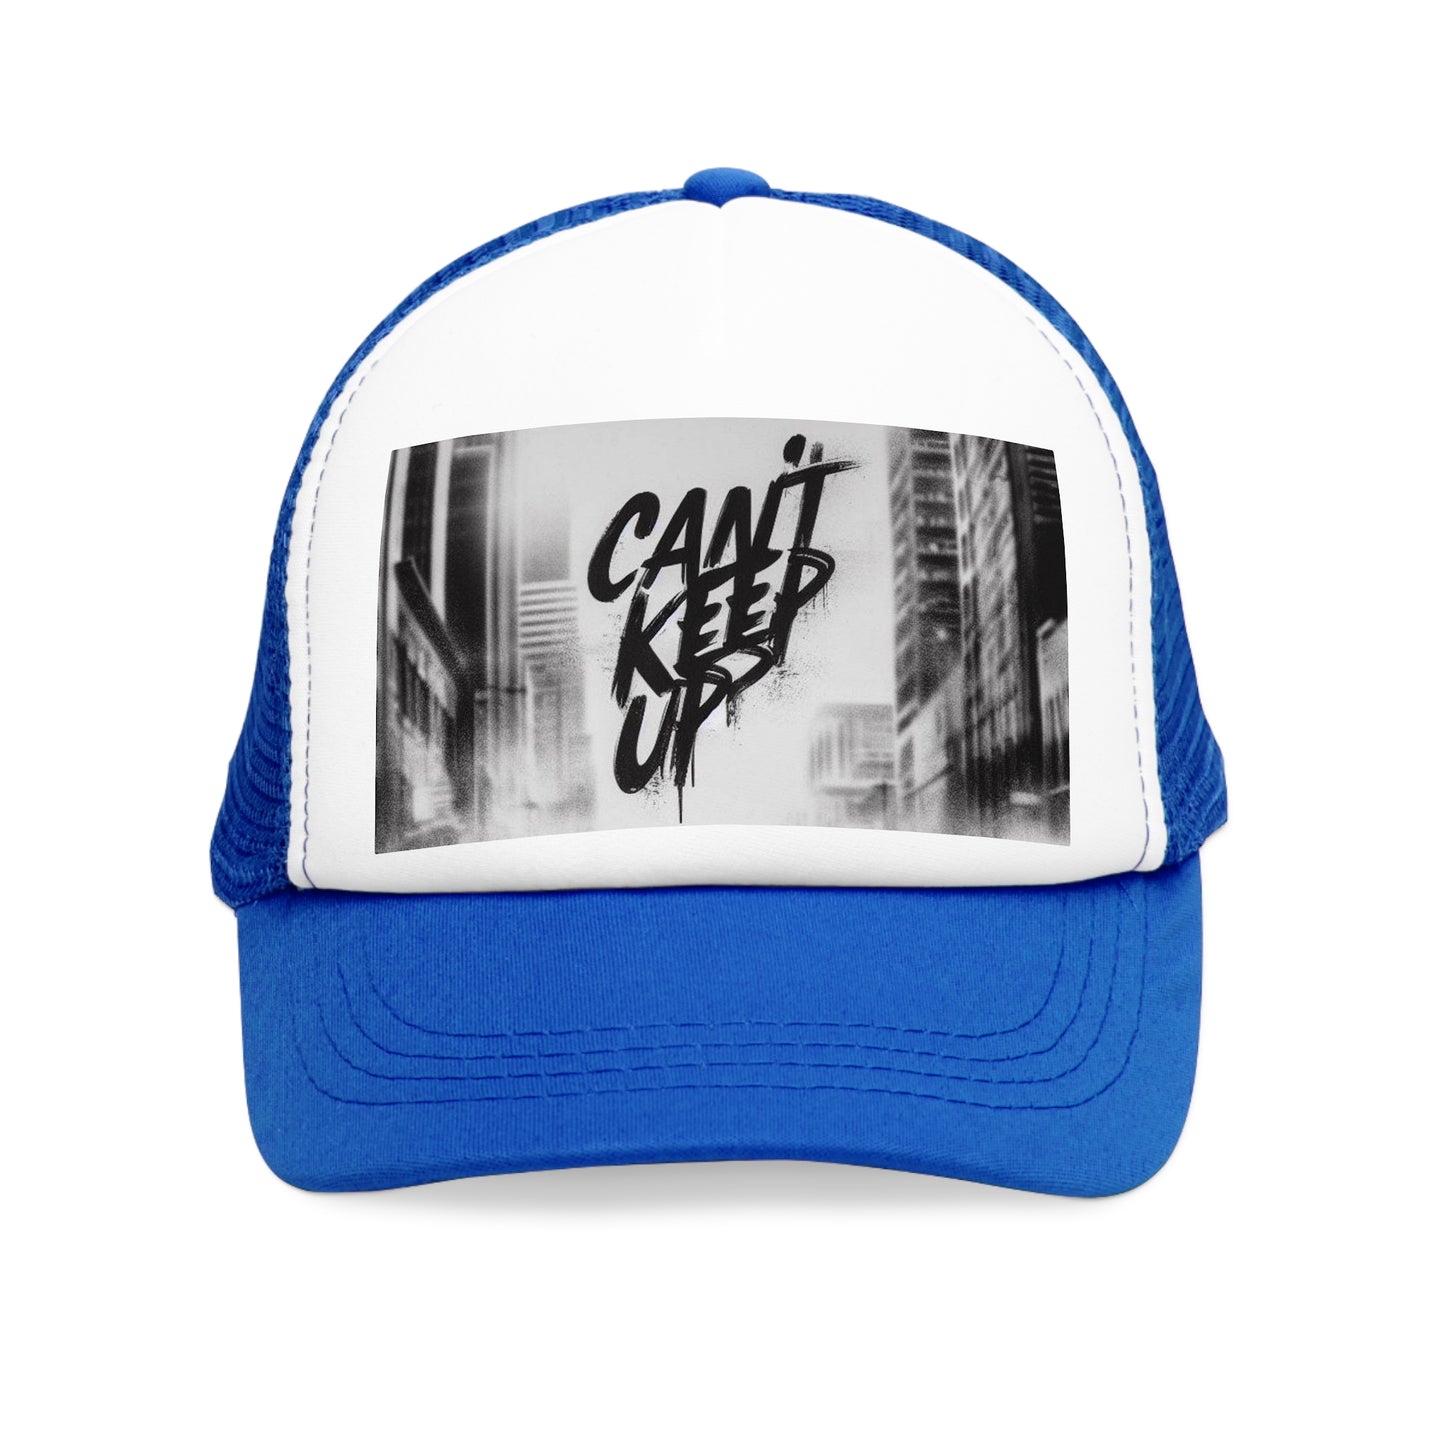 Cant Keep Up Trucker Hat